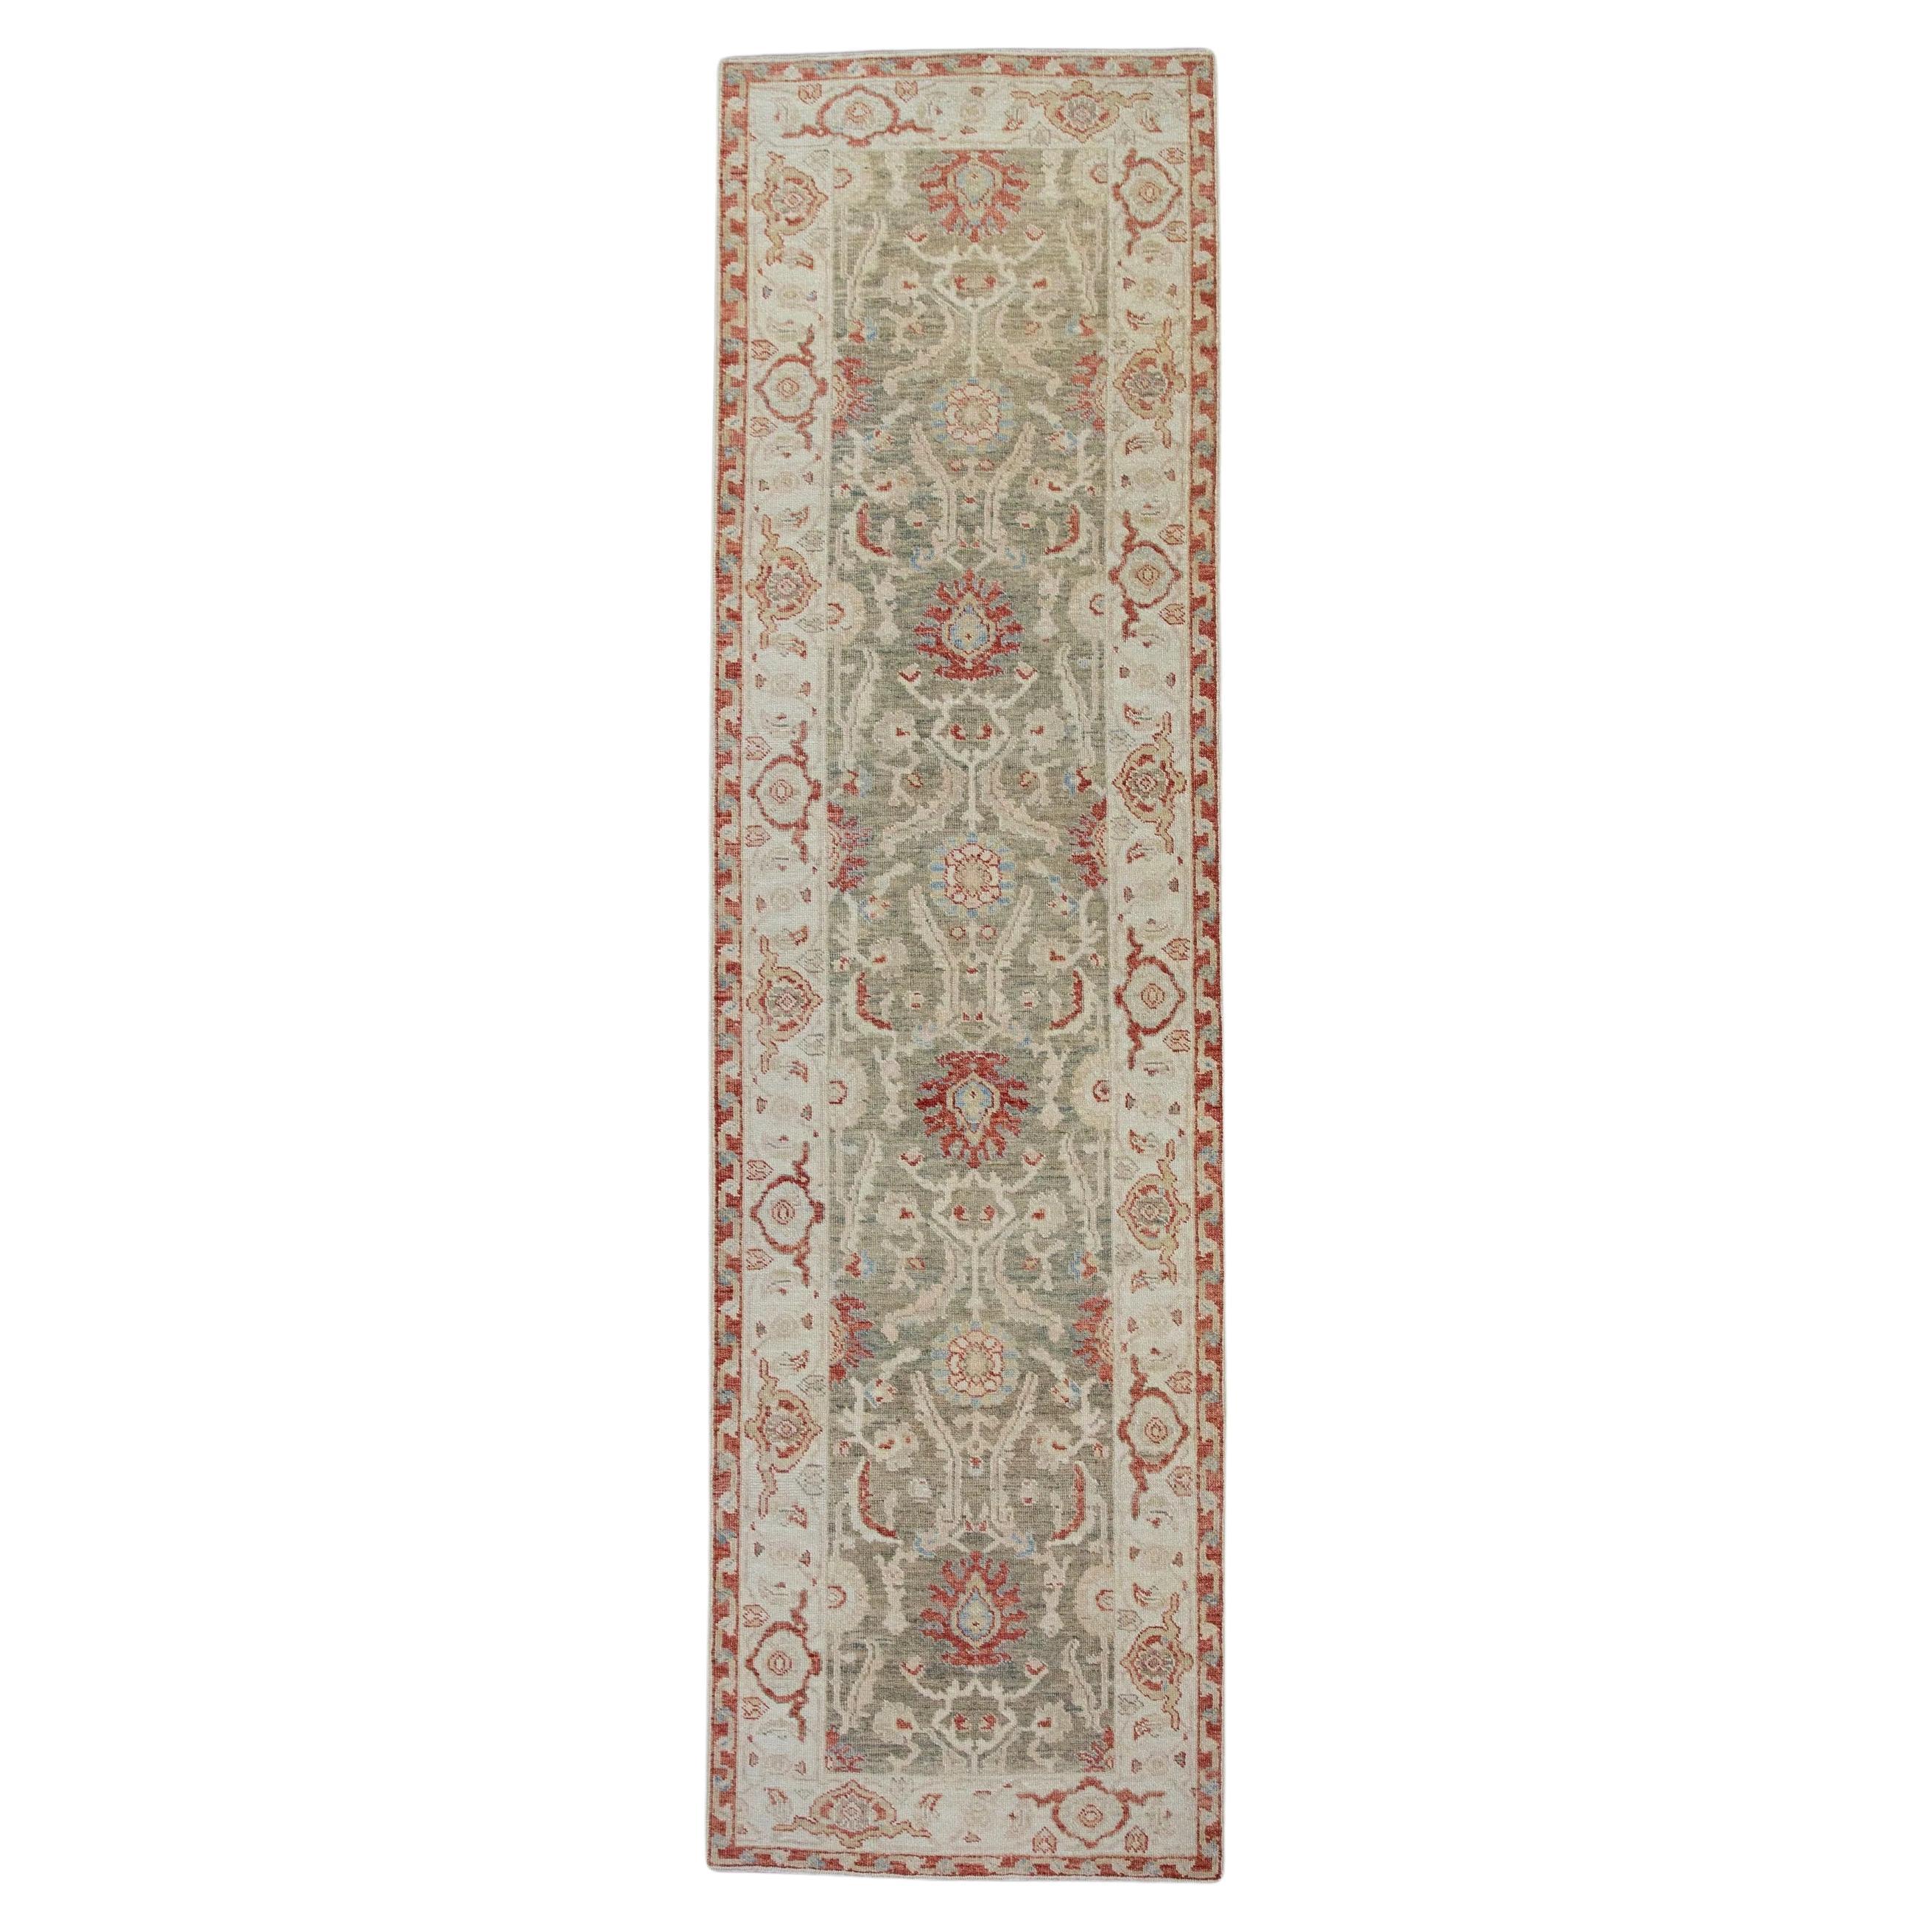 Red and Green Floral Turkish Finewoven Wool Oushak Rug 2'8" x 9'6" For Sale